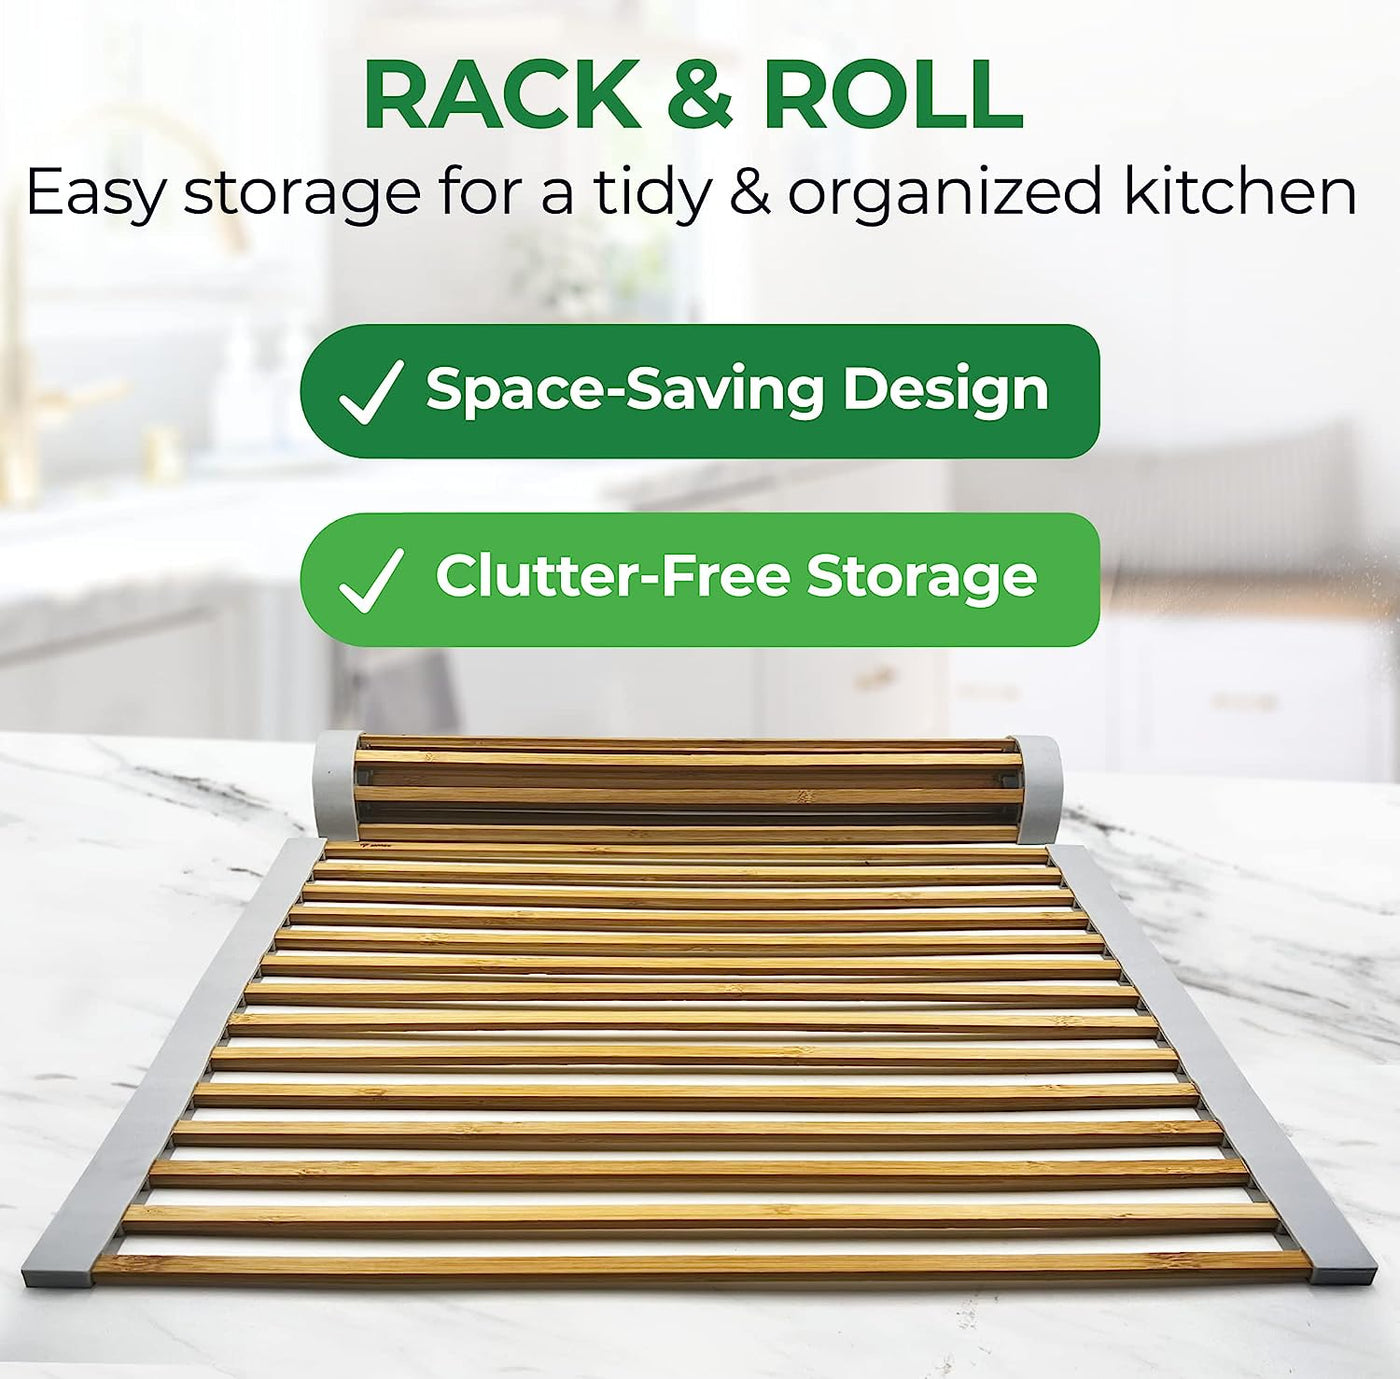 AIRNEX Bamboo Sink Drying Rack, Roll Up Dish Drying Rack Over The Sink Kitchen, Wooden Over The Sink Drying Rack for Kitchen Sink, Roll Out Sink Drainers, Kitchen Sink Accessories